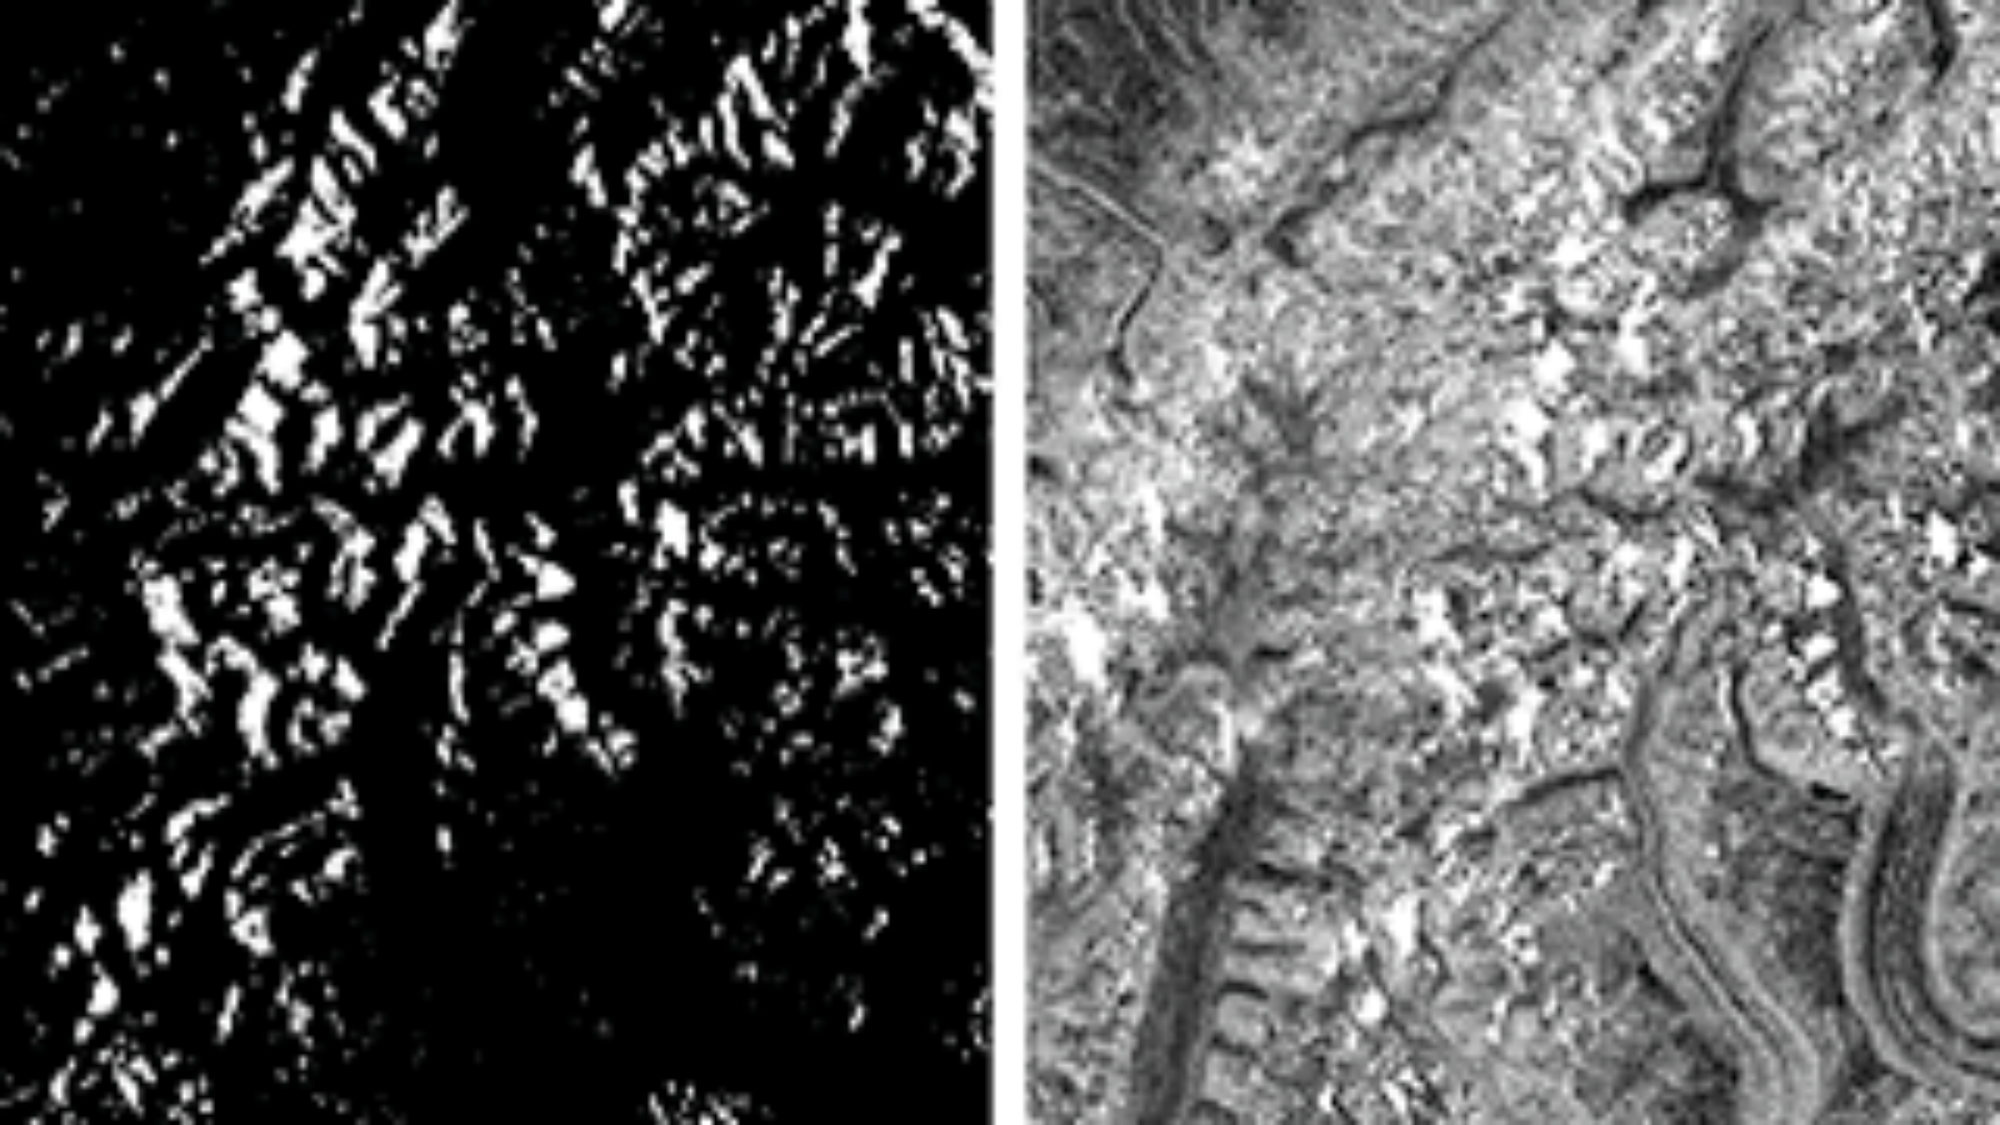 Before and after: Radiometrically terrain-corrected ALOS PALSAR image of part of the Alaska Range in Denali National Park before (left) and after (right) power-scale conversion in ArcGIS. Credit: ASF DAAC 2016; Includes Material © JAXA/METI 2006.